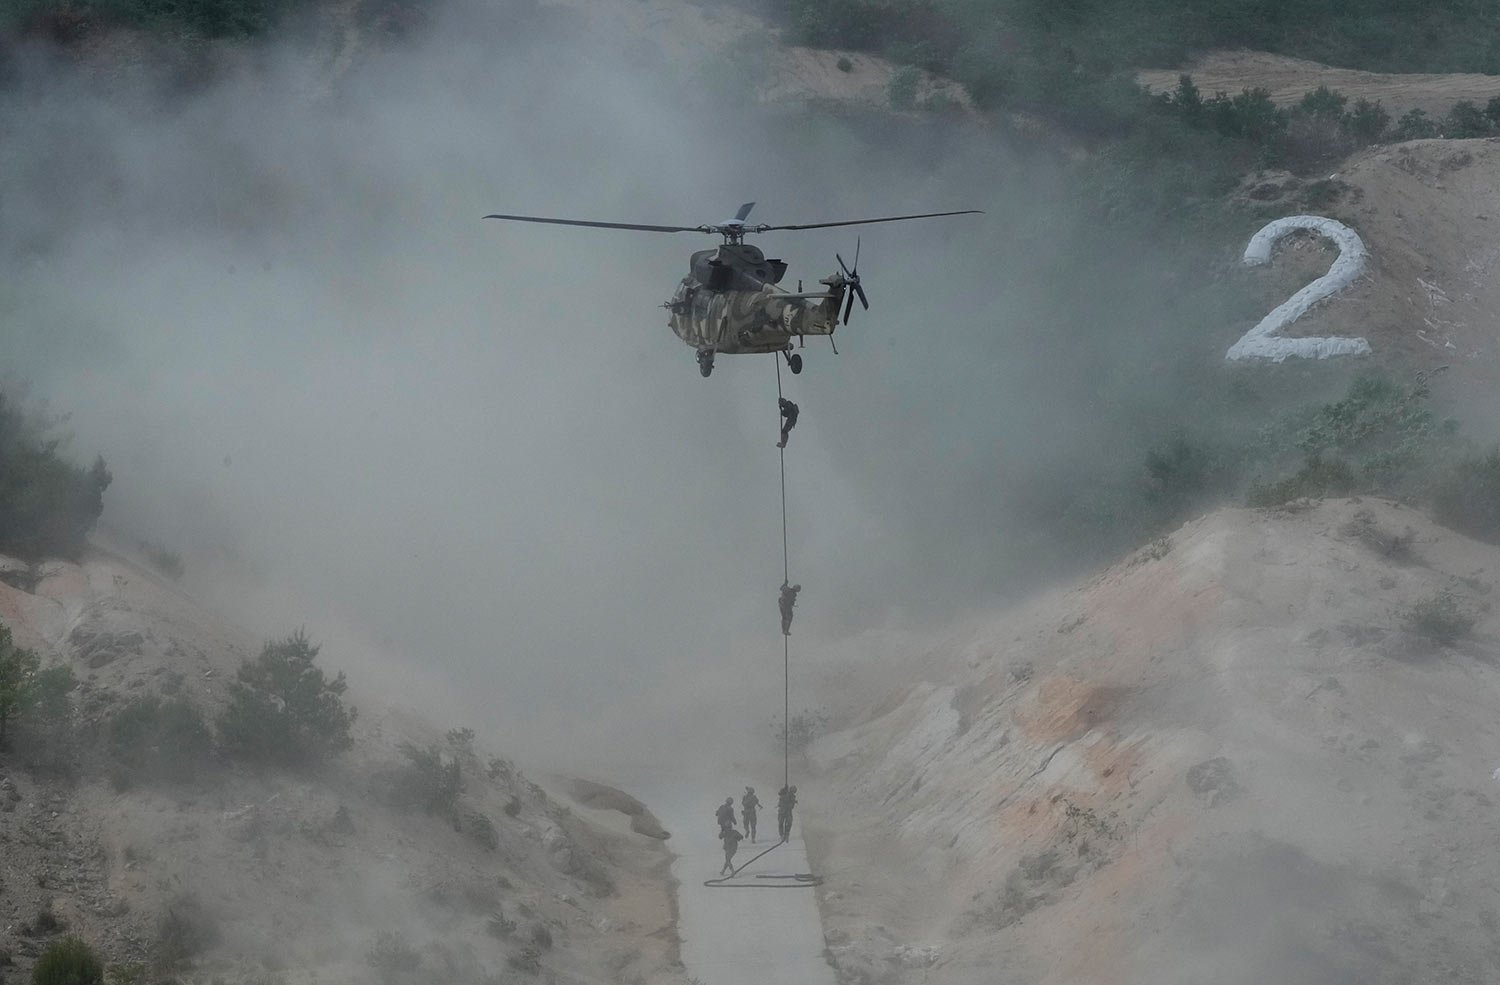  South Korean army soldiers rappel down from a Surion helicopter during South Korea-U.S. joint military drills at Seungjin Fire Training Field in Pocheon, South Korea, Thursday, May 25, 2023. (AP Photo/Ahn Young-joon) 